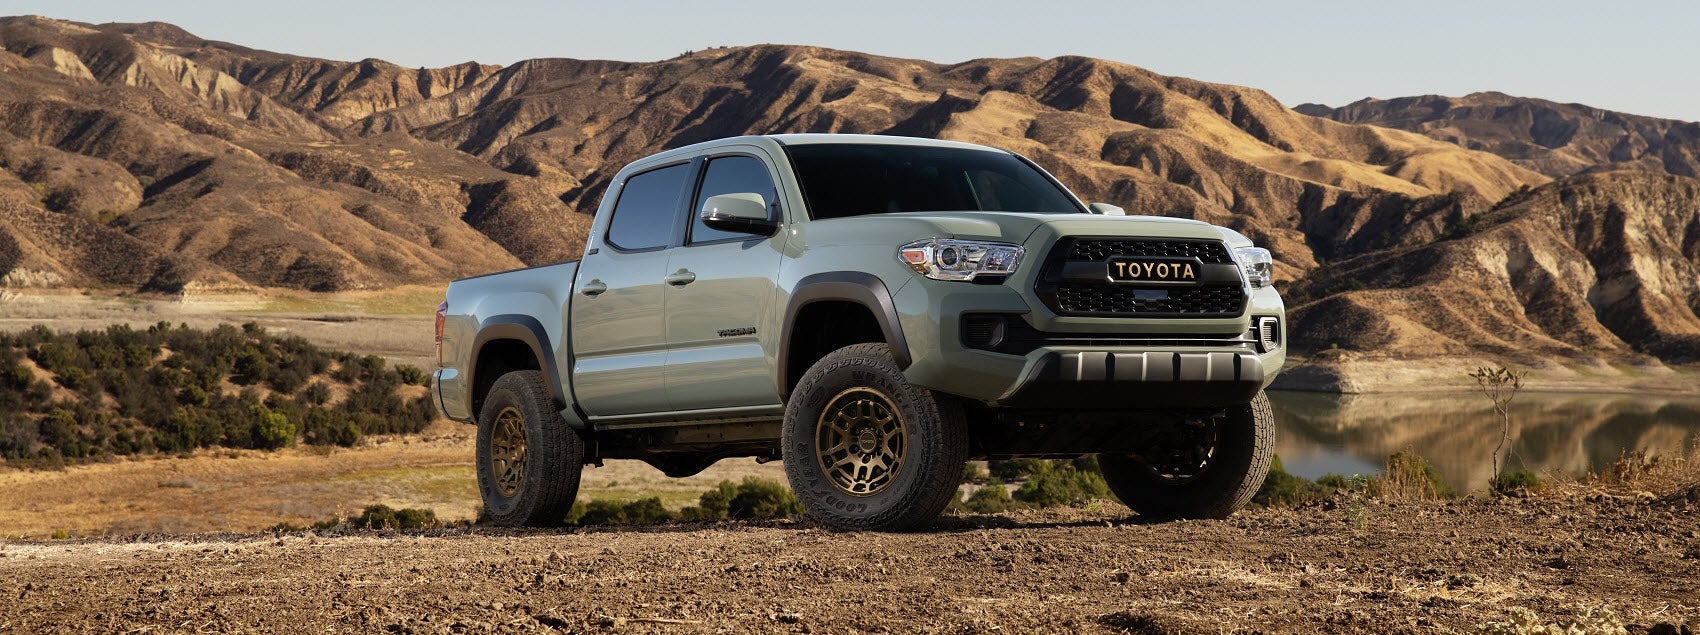 Toyota Tacoma on a dirt road